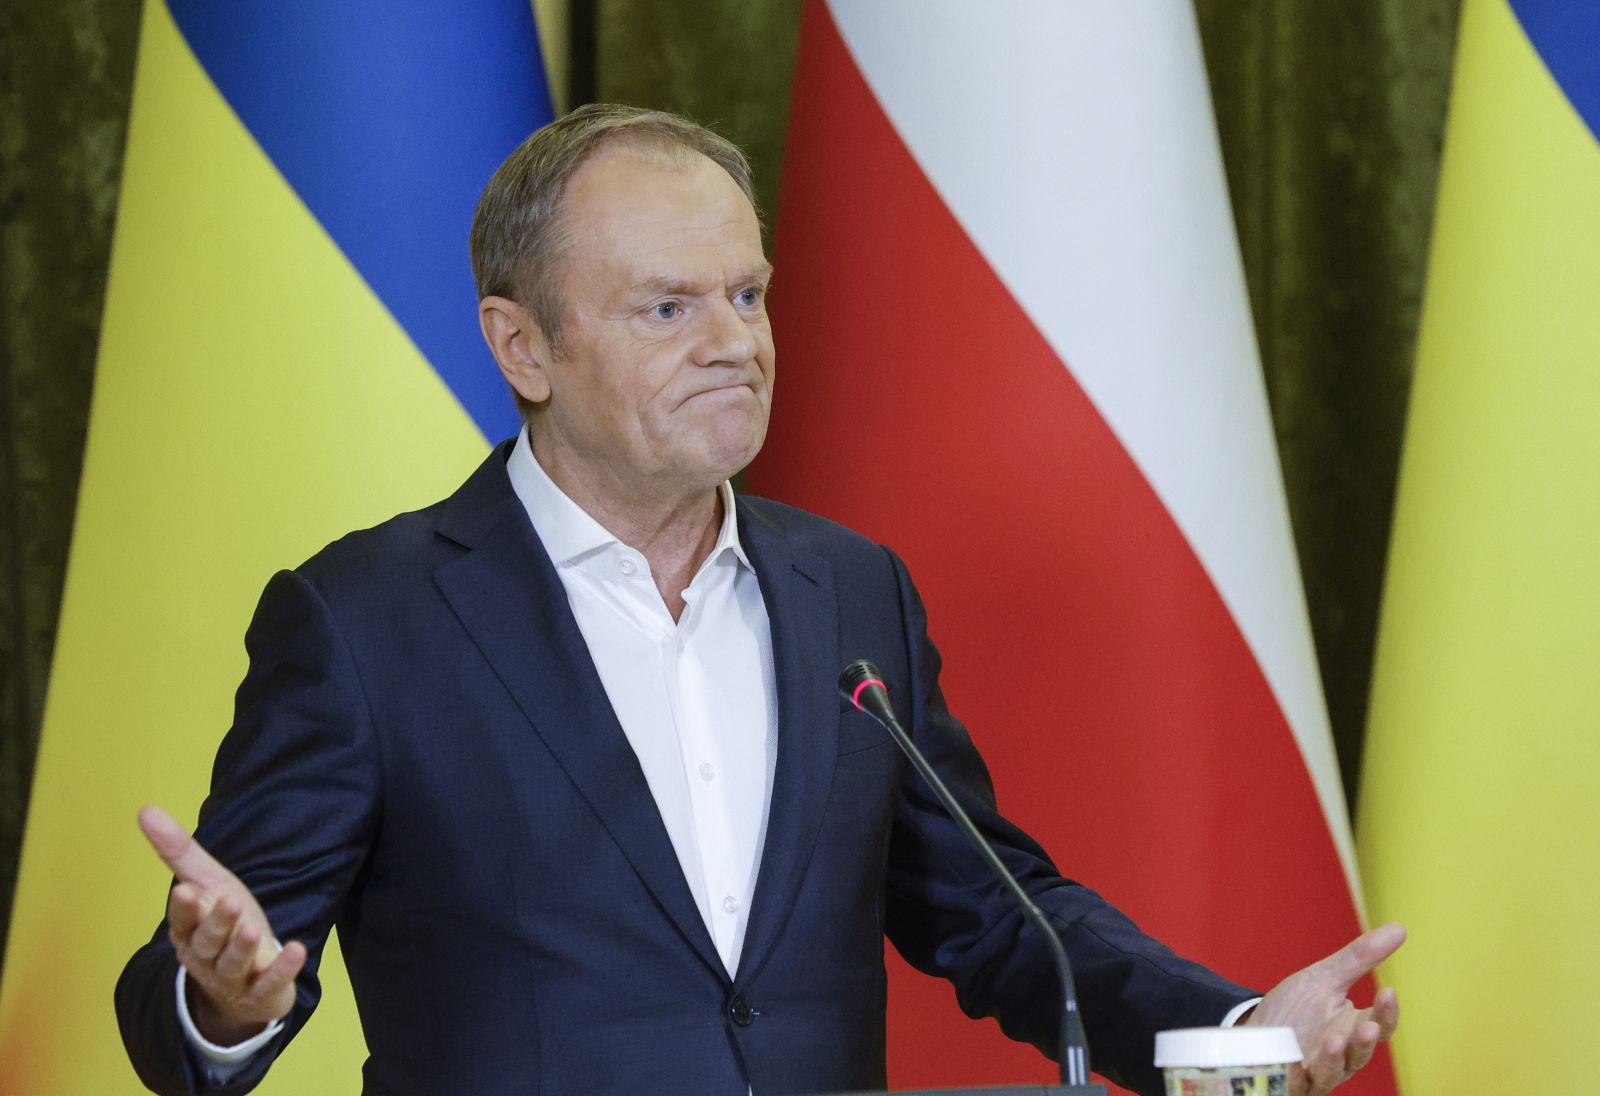 epa11096349 Polish Prime Minister Donald Tusk speaks during a statement to the media with Ukrainian President Volodymyr Zelensky (not pictured) after their meeting in Kyiv, Ukraine, 22 January 2024. Tusk arrived in Kyiv to meet with top Ukrainian officials amid the ongoing Russian invasion.  EPA/SERGEY DOLZHENKO